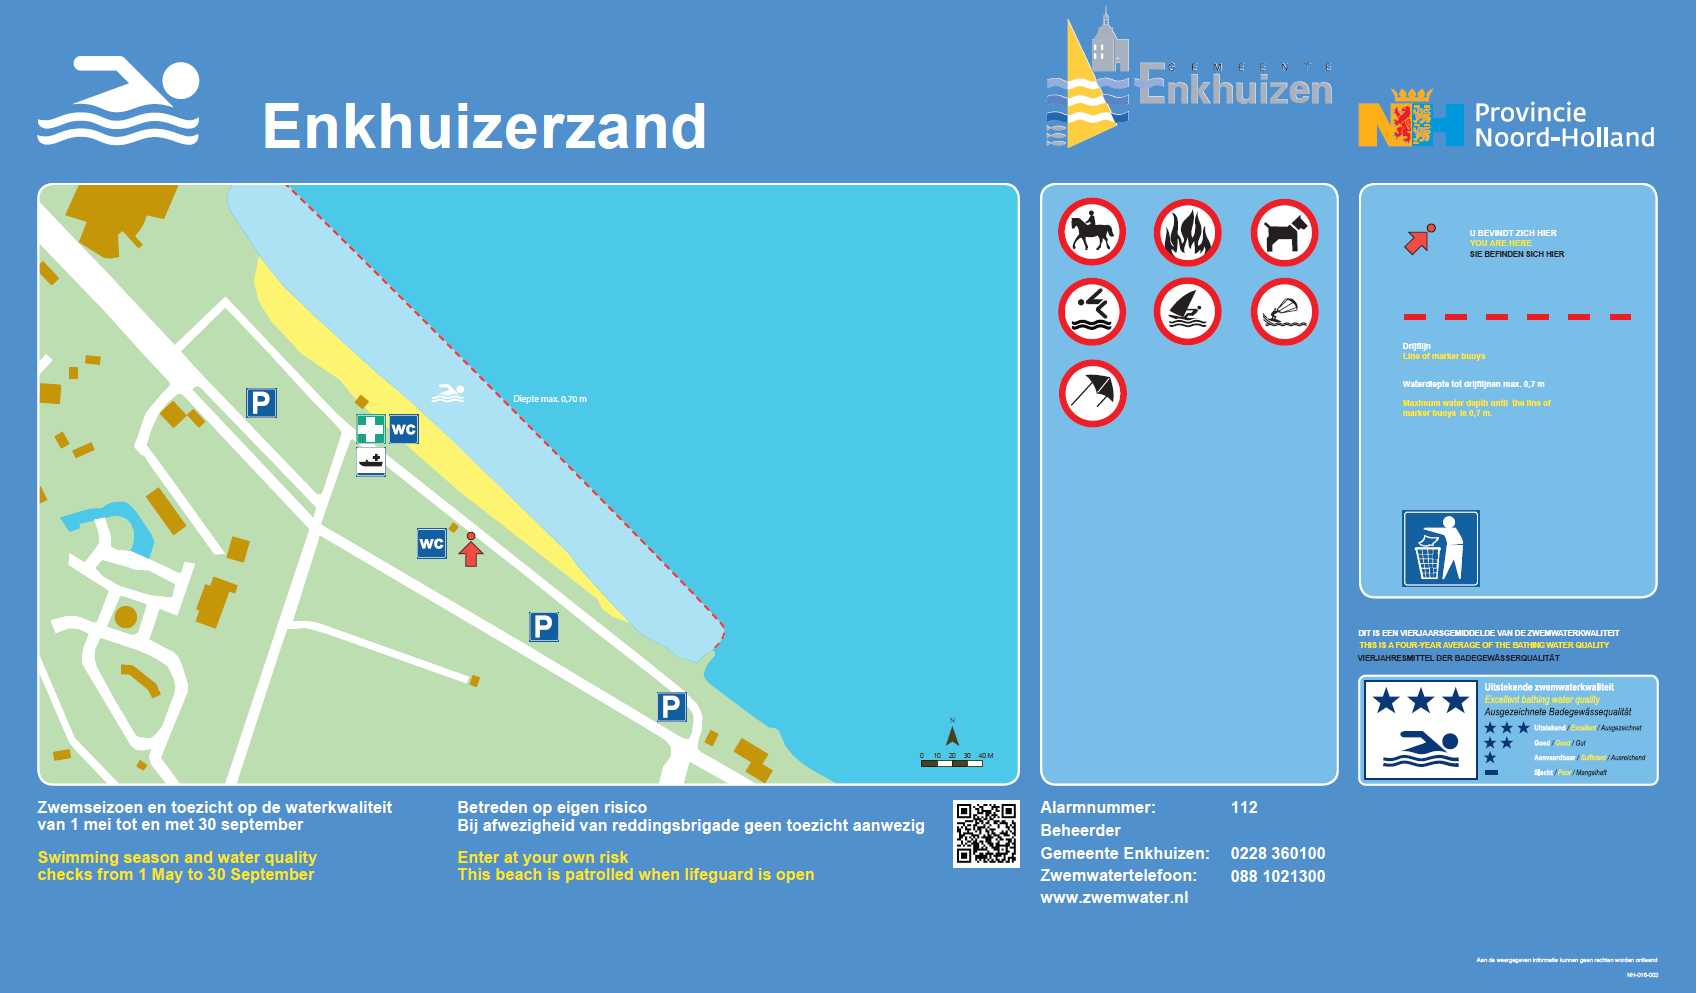 The information board at the swimming location Enkhuizerzand